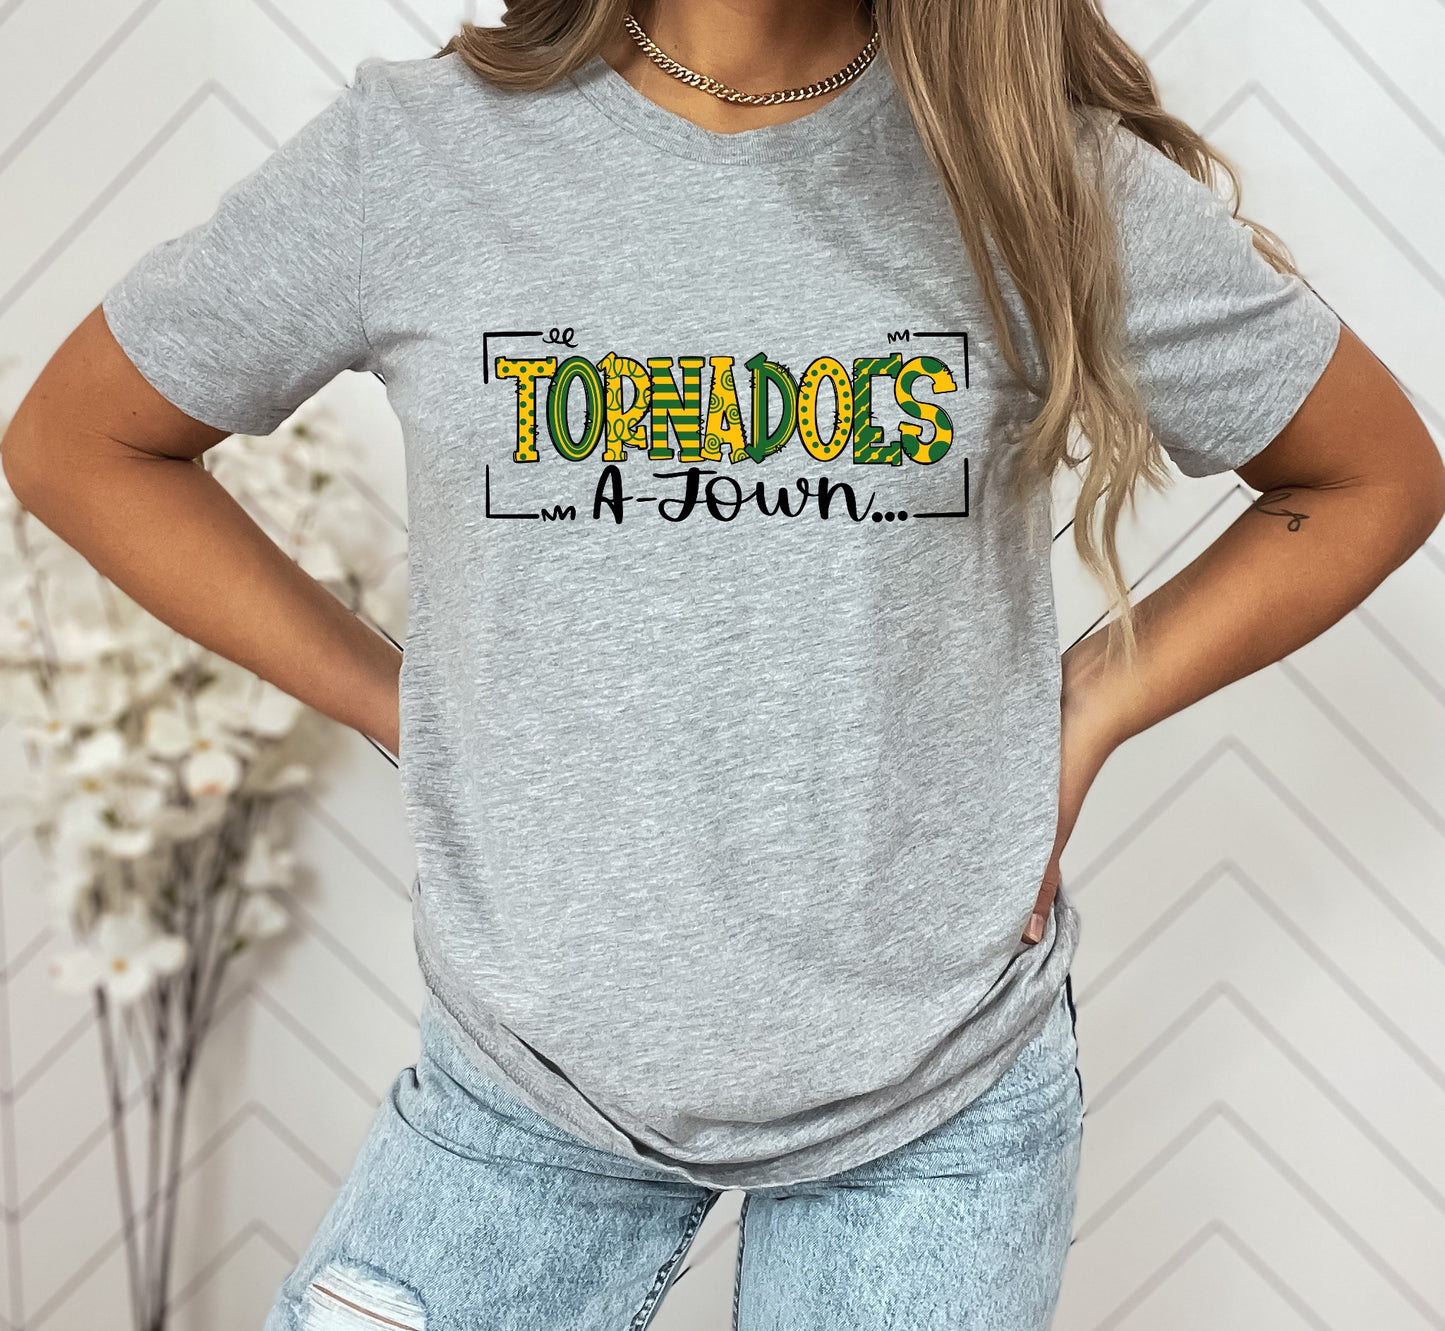 Tornadoes A Town Doodle Graphic Tee